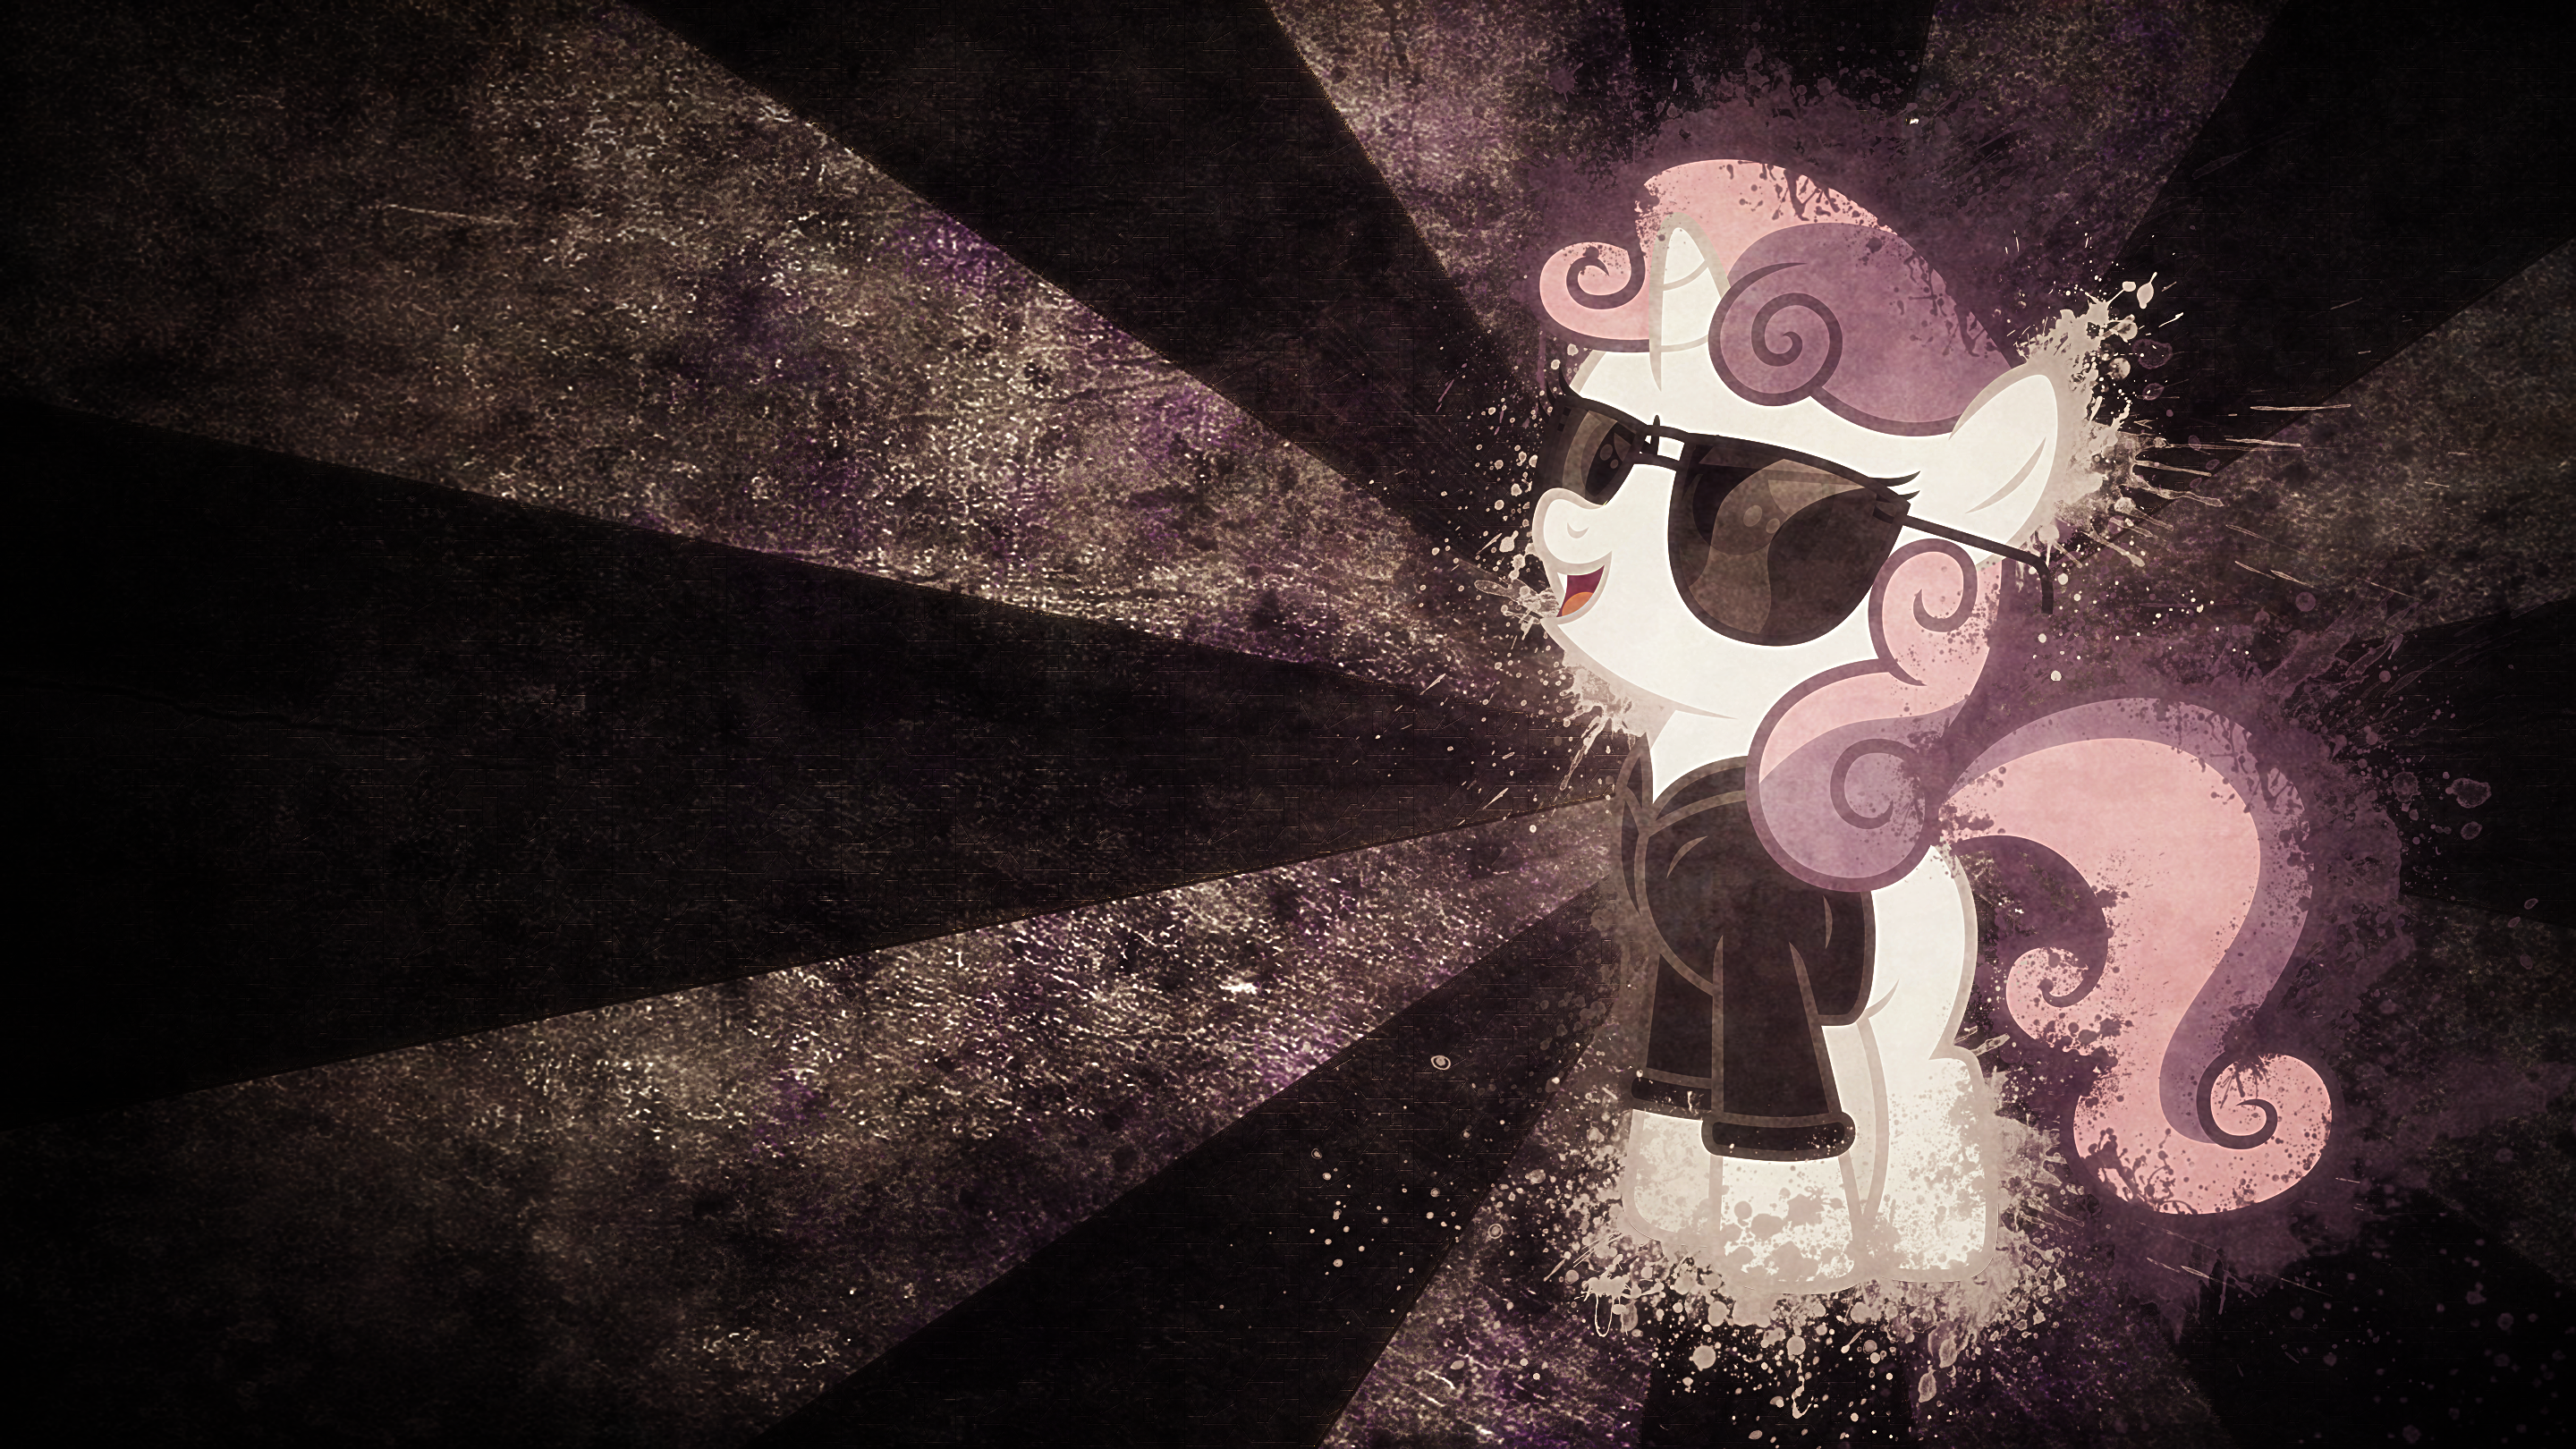 Special Agent Sweetie Belle - Wallpaper by Austiniousi and Tzolkine